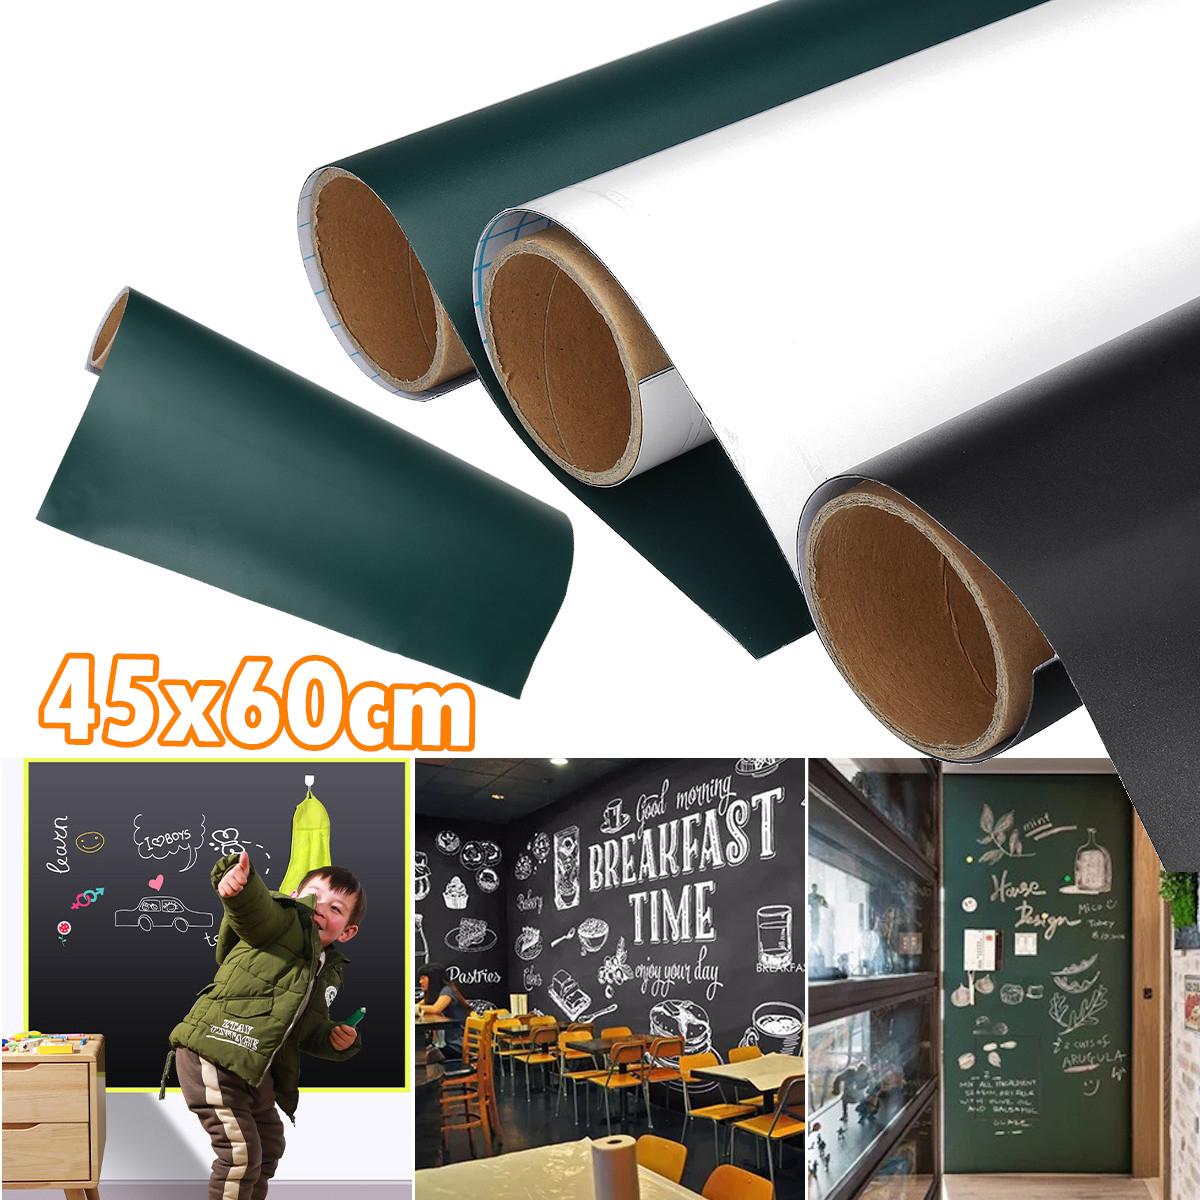 4560cm-Wall-Sticker-Magnet-Board-Drawing--DIY-Room-Wall-Decor-Decal-Home-Living-Room-1646612-2